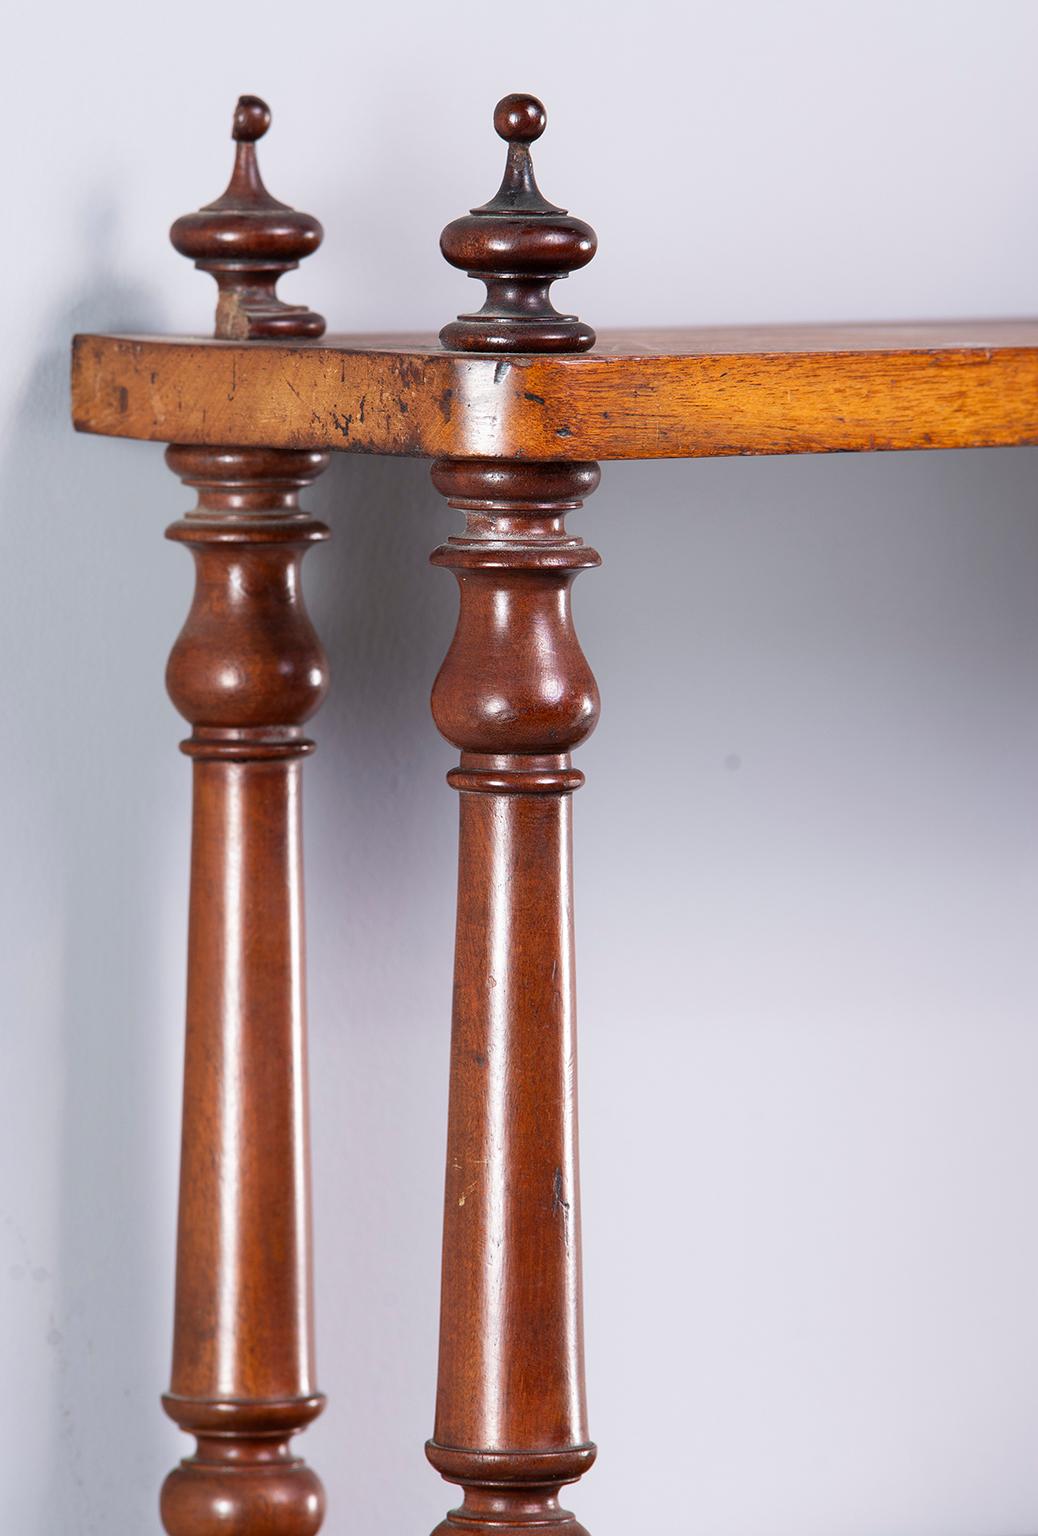 English Regency period mahogany wall shelf is four feet wide with three shelves and fancy turned supports, circa 1830s.
 